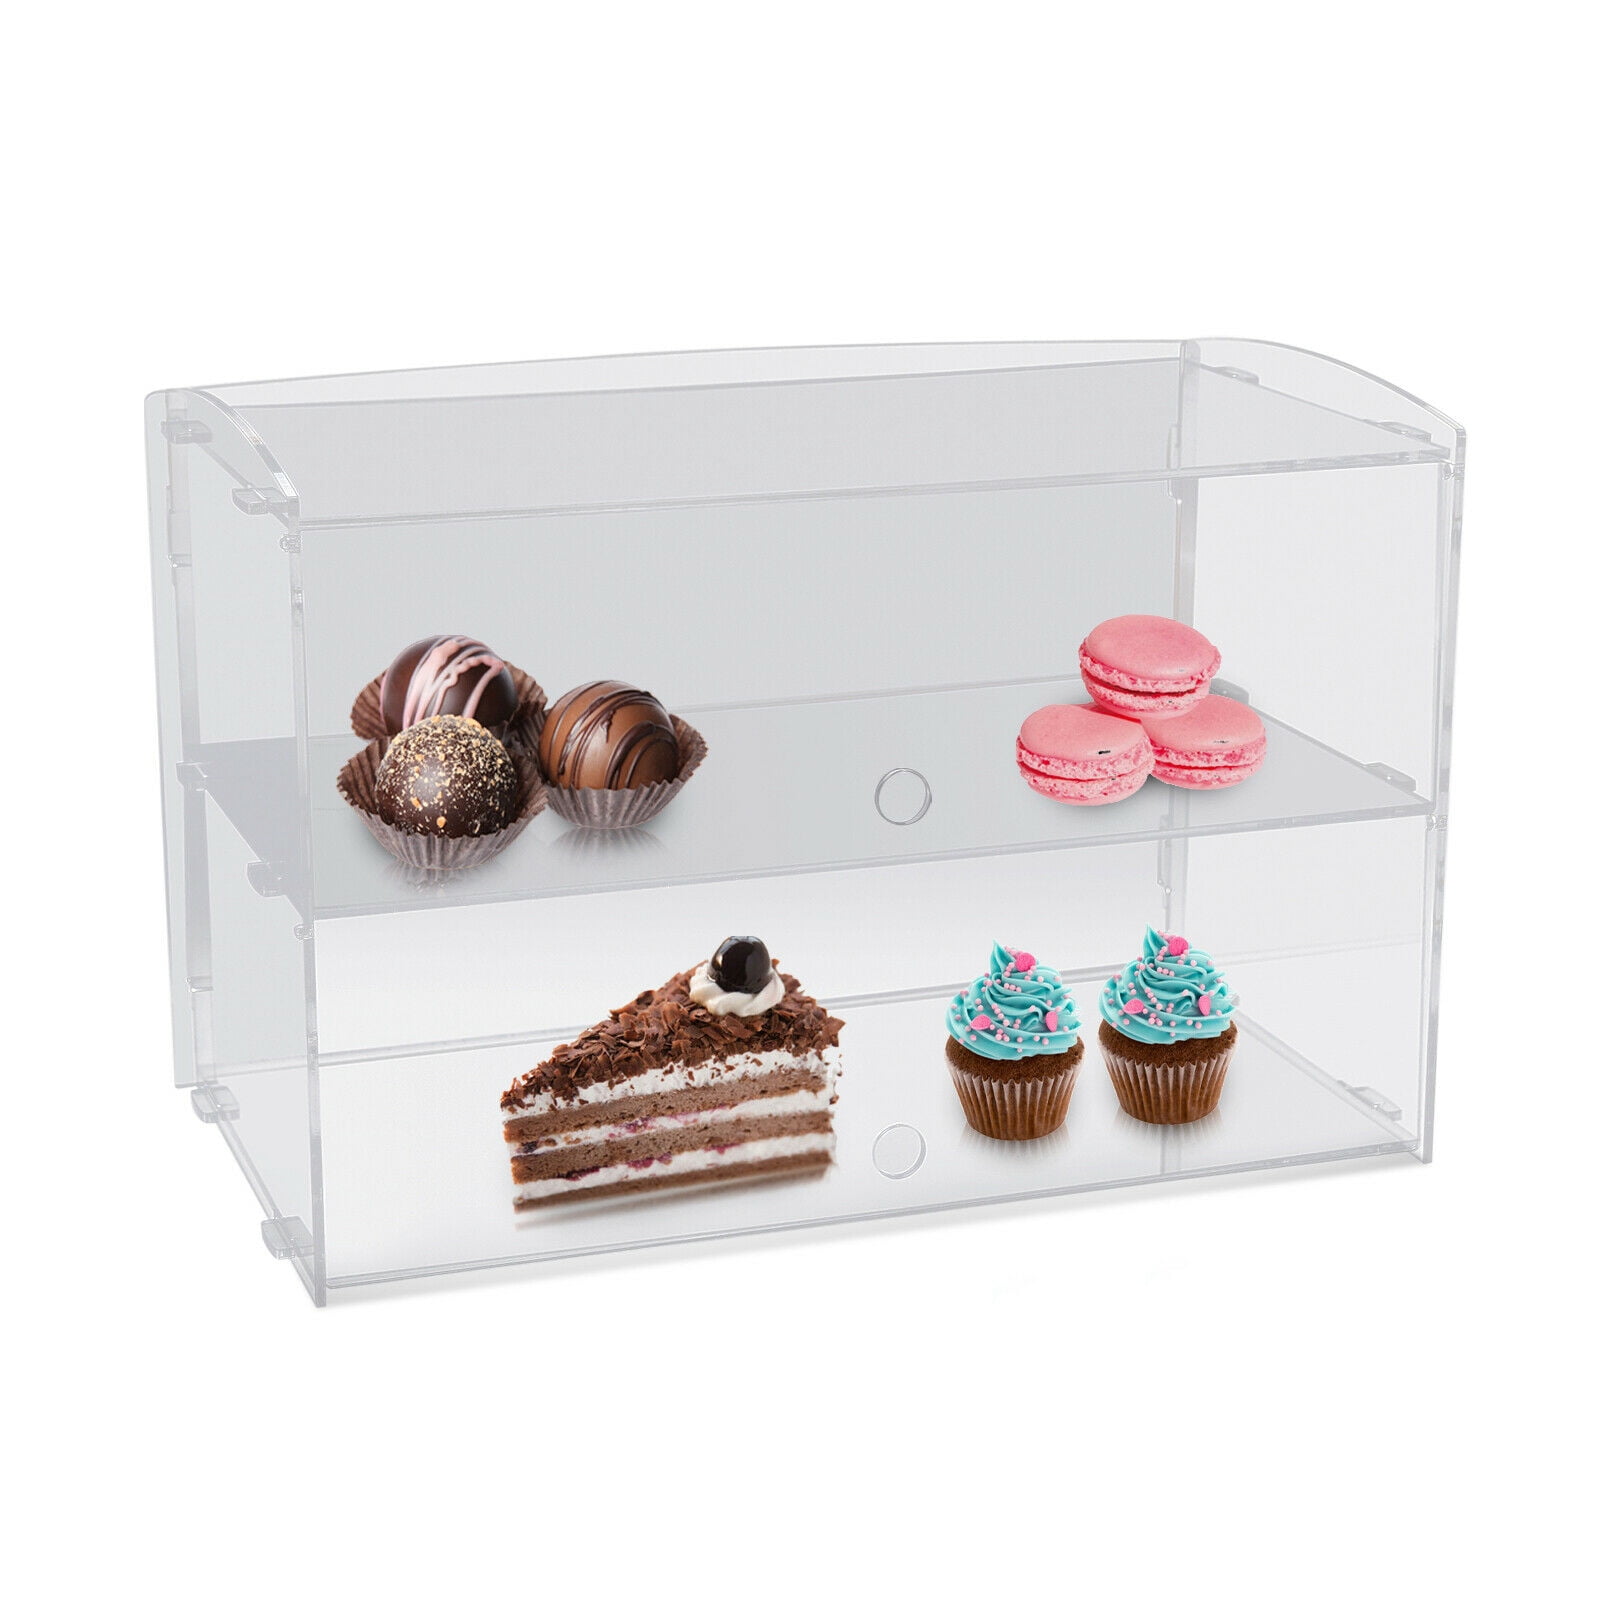 Clear Acrylic Cupcake Stand - 5 Tier - KM Party Rental